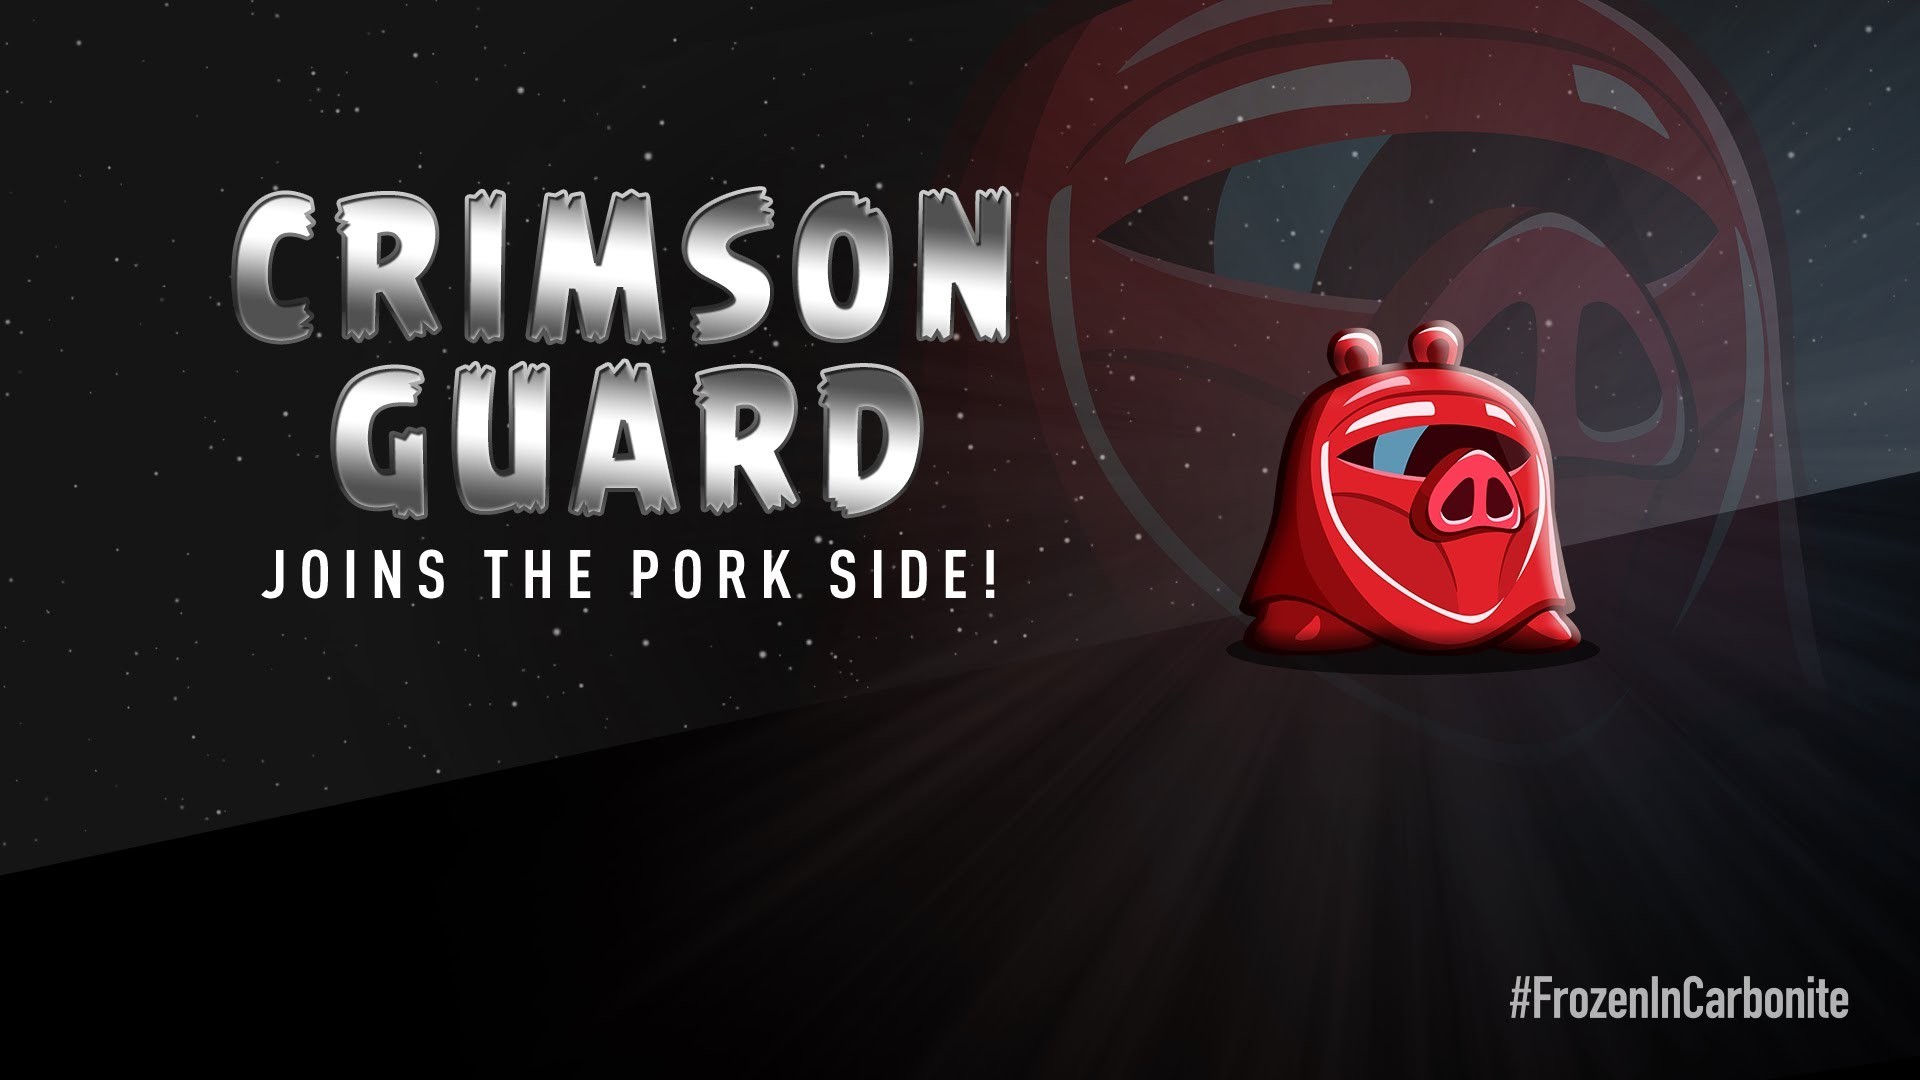 1920x1080 Angry Birds Star Wars 2 Carbonite Pack character reveals: Crimson Guard